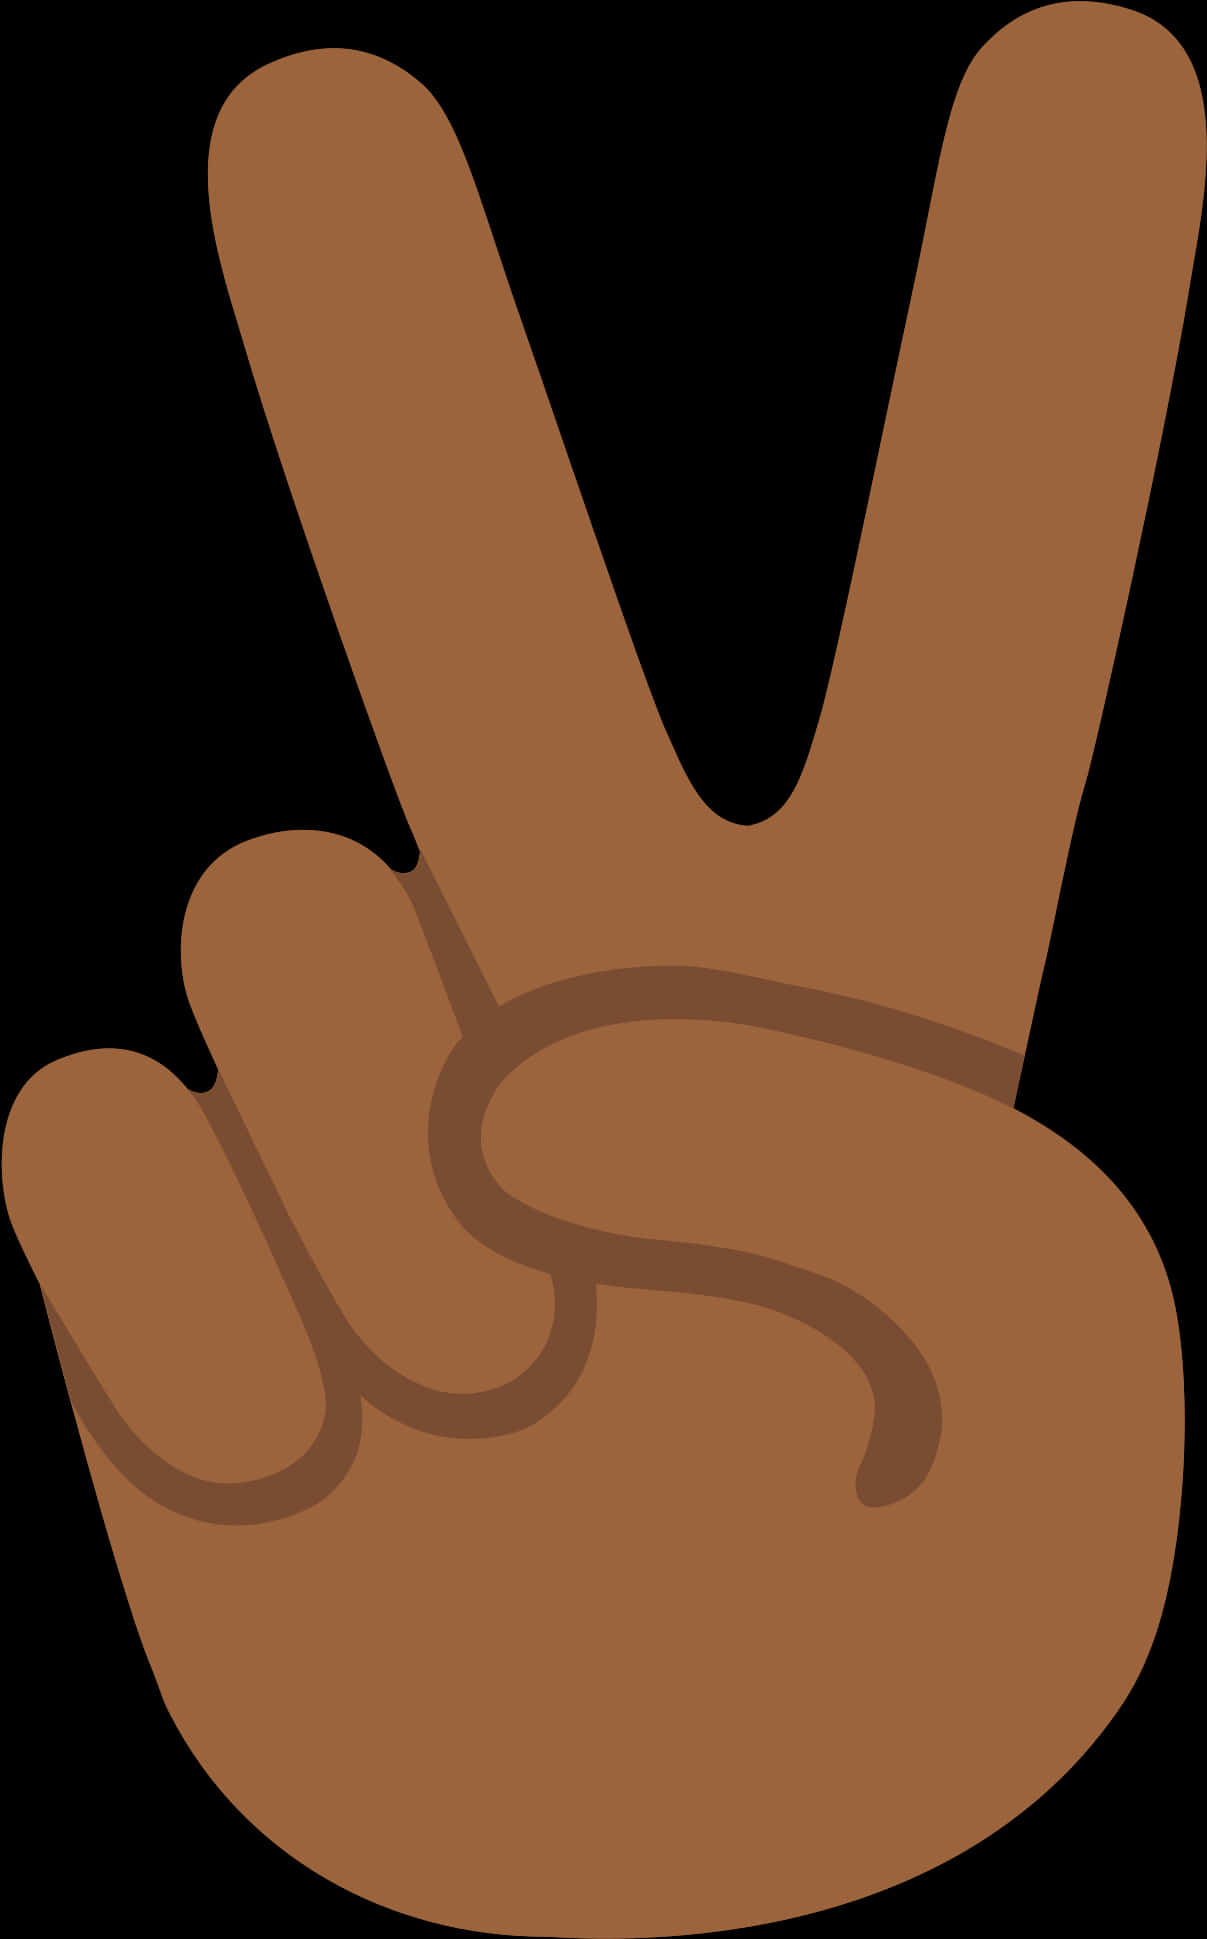 Peace Sign Hand Gesture PNG image